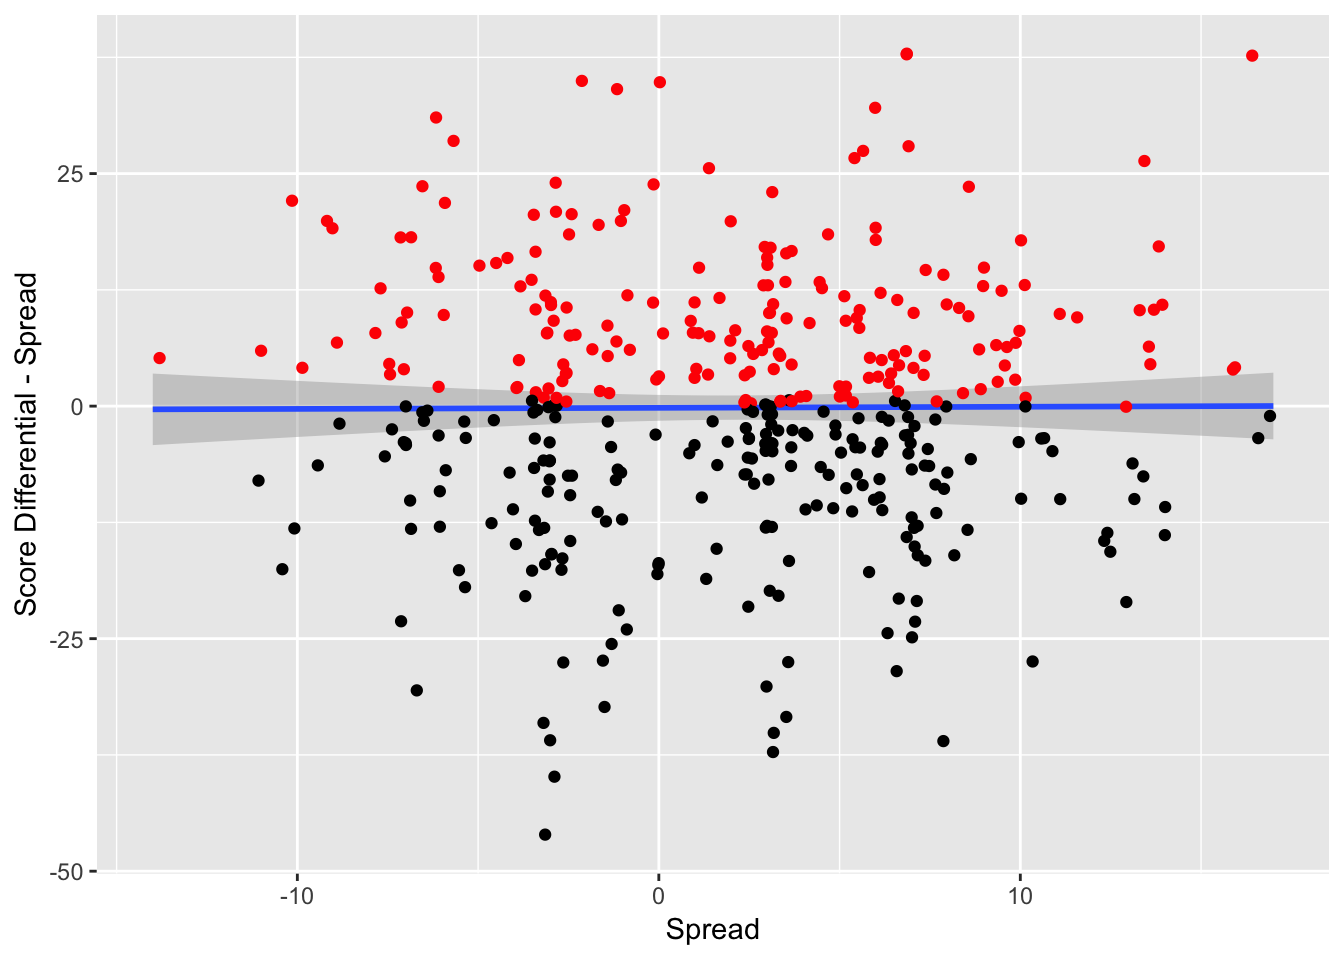 Game Result Against Spread vs. Spread -- The red indicates that the team has beat the spread and the black indicates that the team has failed to beat the spread